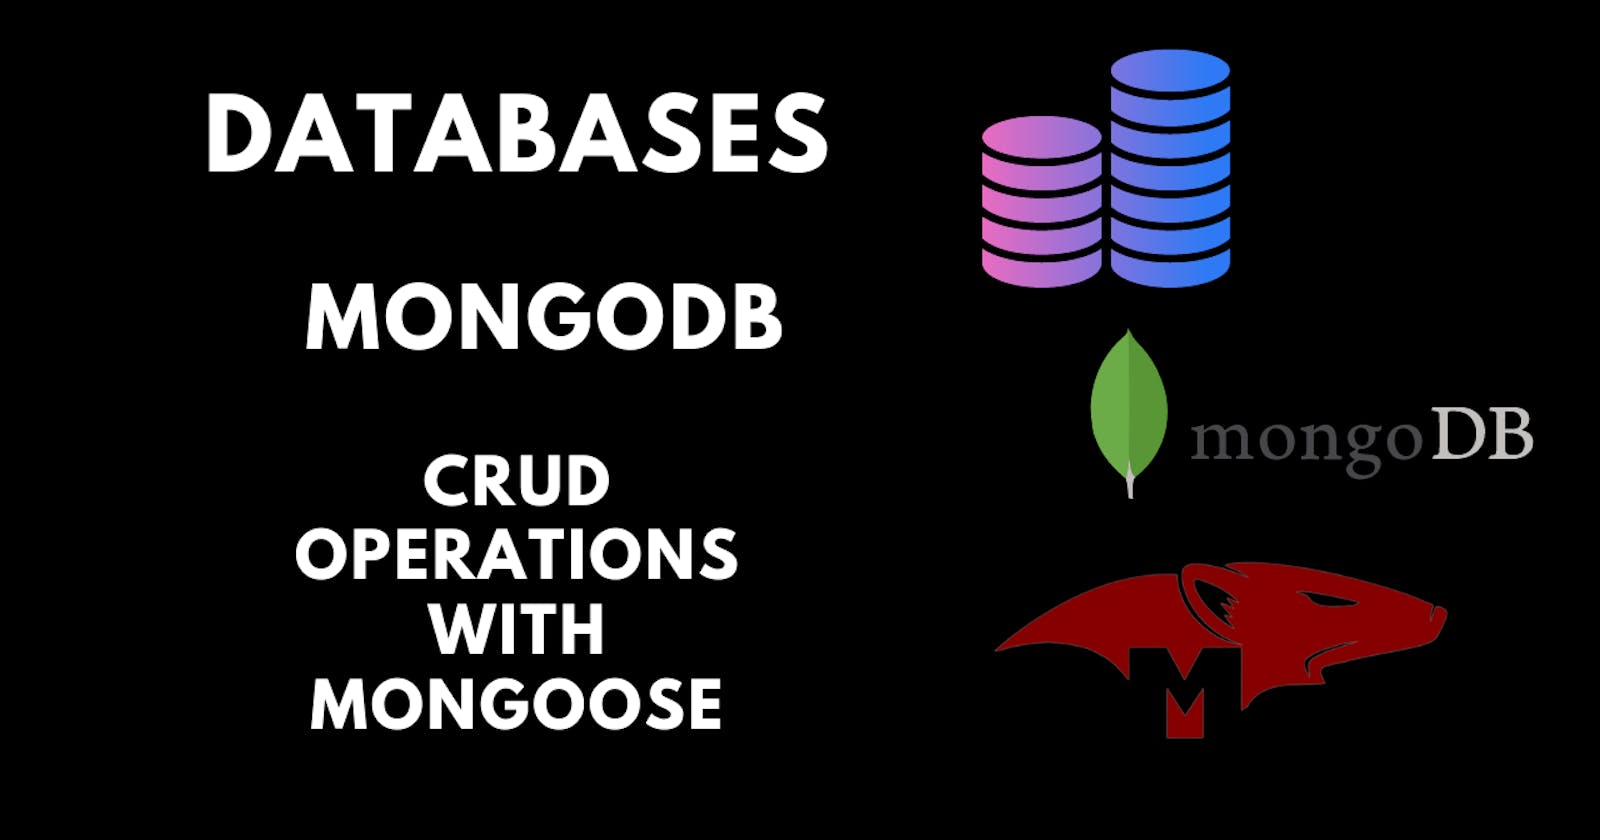 Databases and CRUD operations in MongoDB using Mongoose